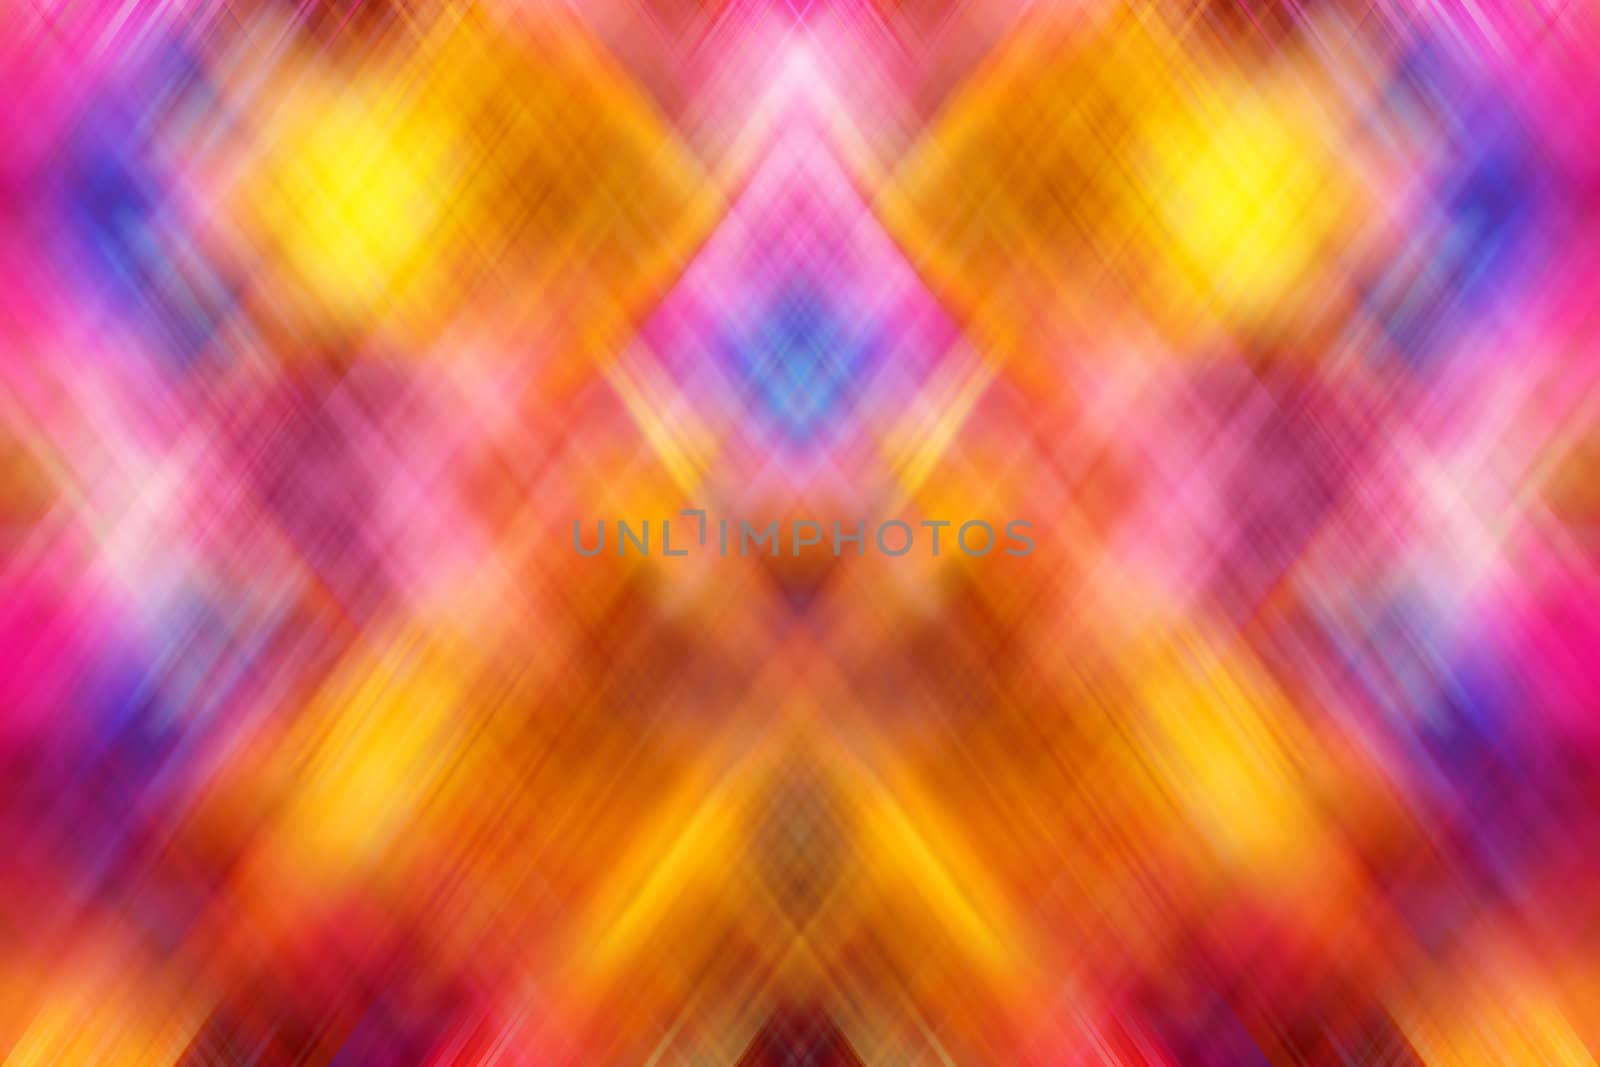 abstract background with bright colors random patterns great for a stylish website started out as a christmas light picture